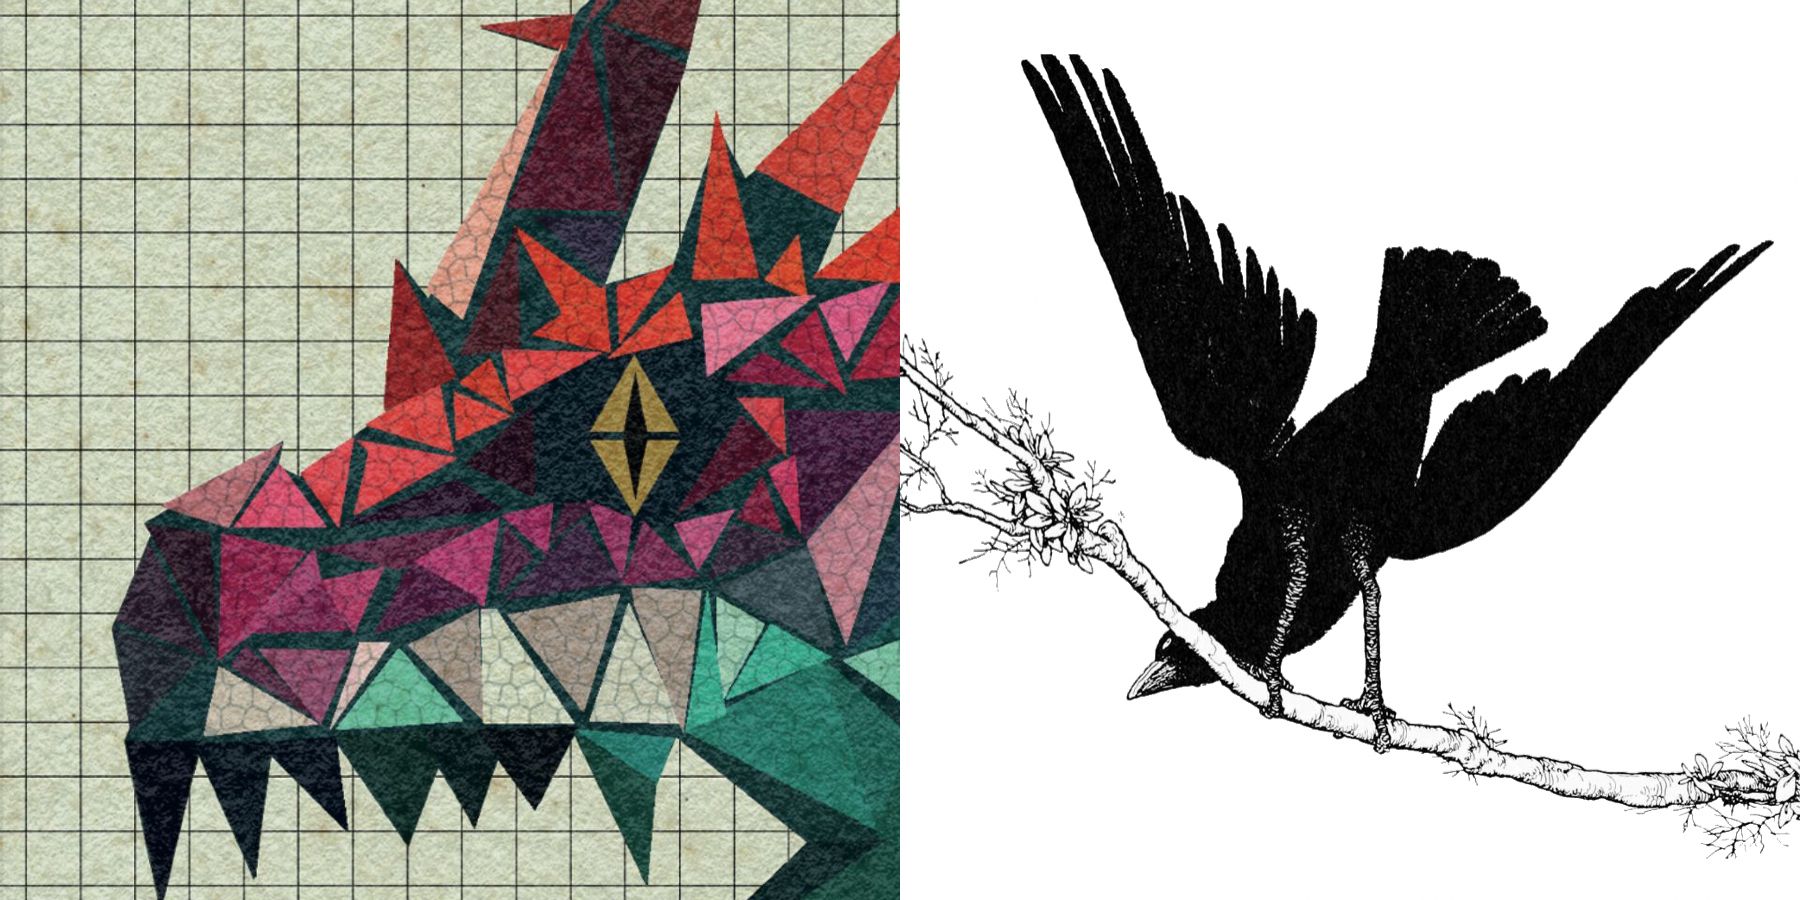 A split image showing promo artwork for two TTRPGs, a polygonal, colorful dragon's head for a dungeon game on the left, and a black and white bird on a brand for Cairn on the right.